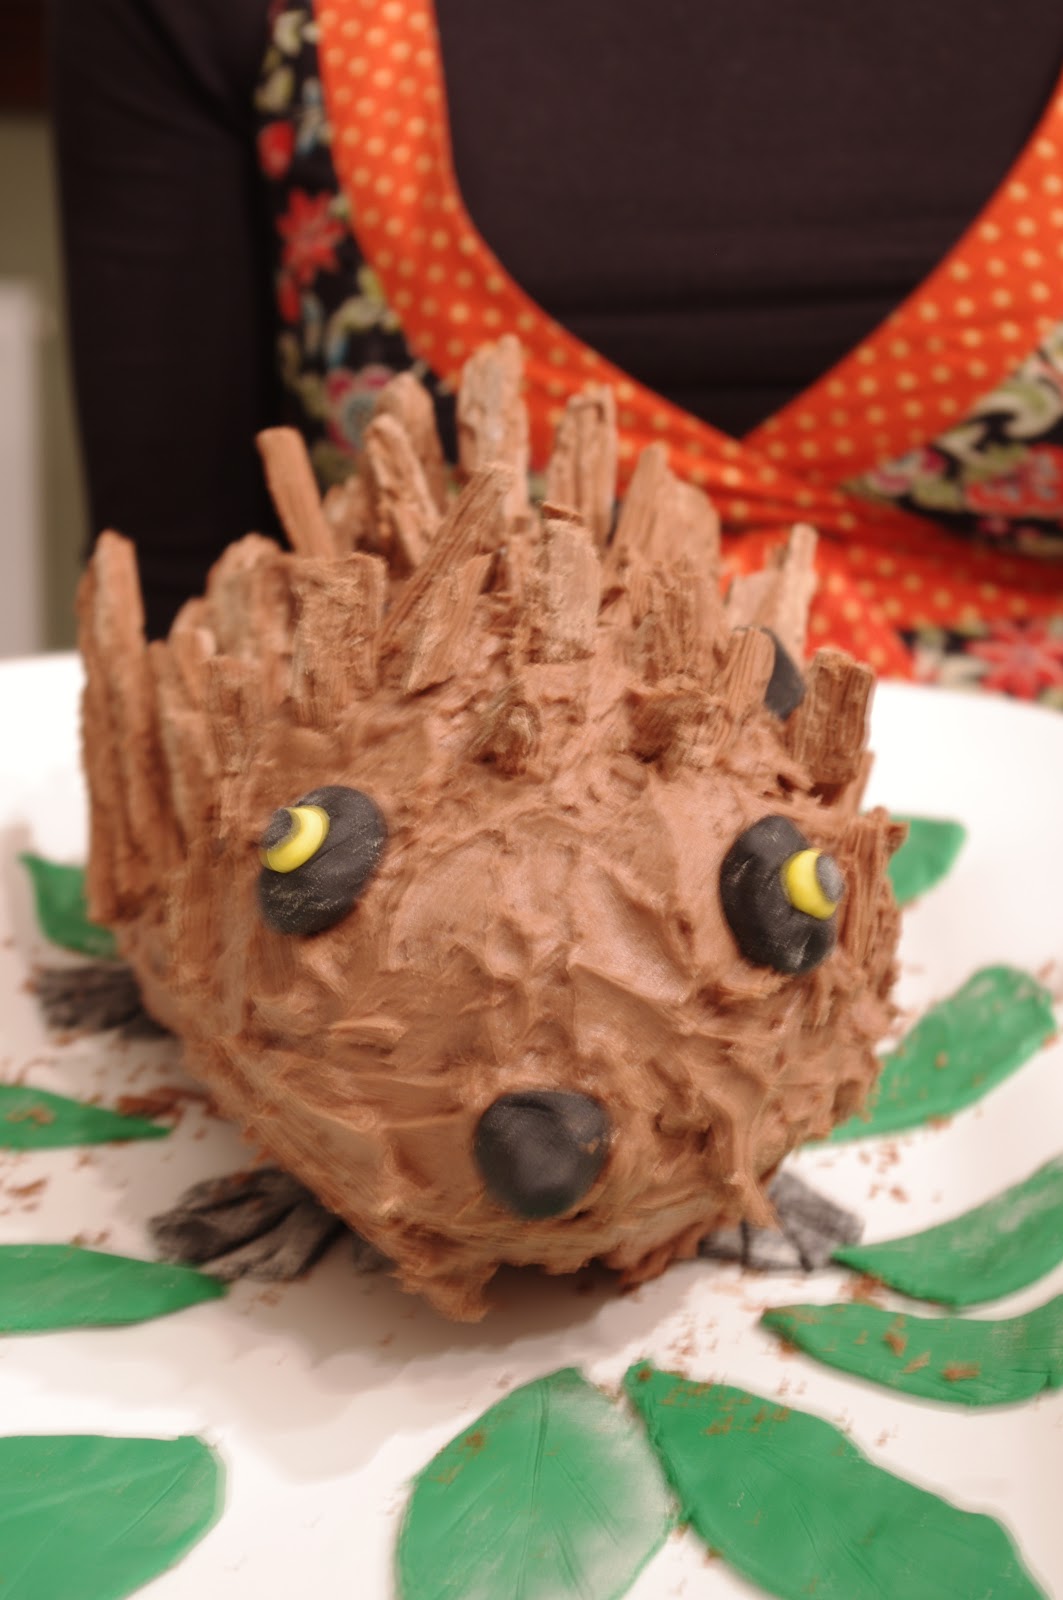 Grazing Kate: Chocolate Hedgehog Cake for Son's 10th Birthday Party